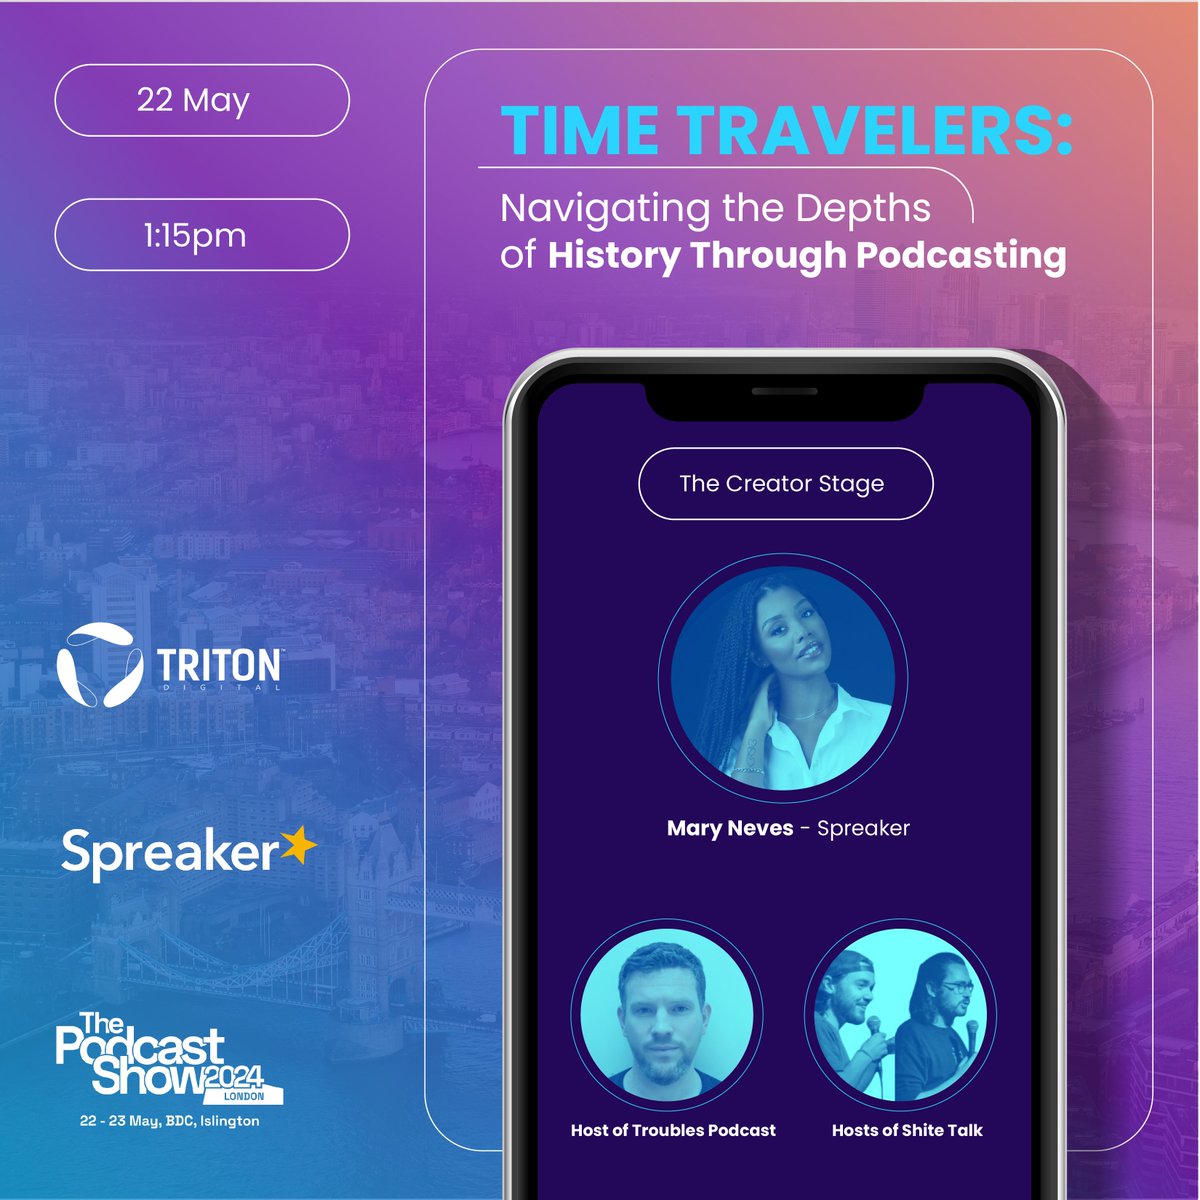 Here's your opportunity to hear from history #podcasters first hand at the @PodcastShowLDN as they showcase their journeys and stories from Ireland to Africa.

Join @spreaker's Mary Neves alongside hosts of @TroublesPodcast and @ShiteTalkIRE as they dive into the beginning of…